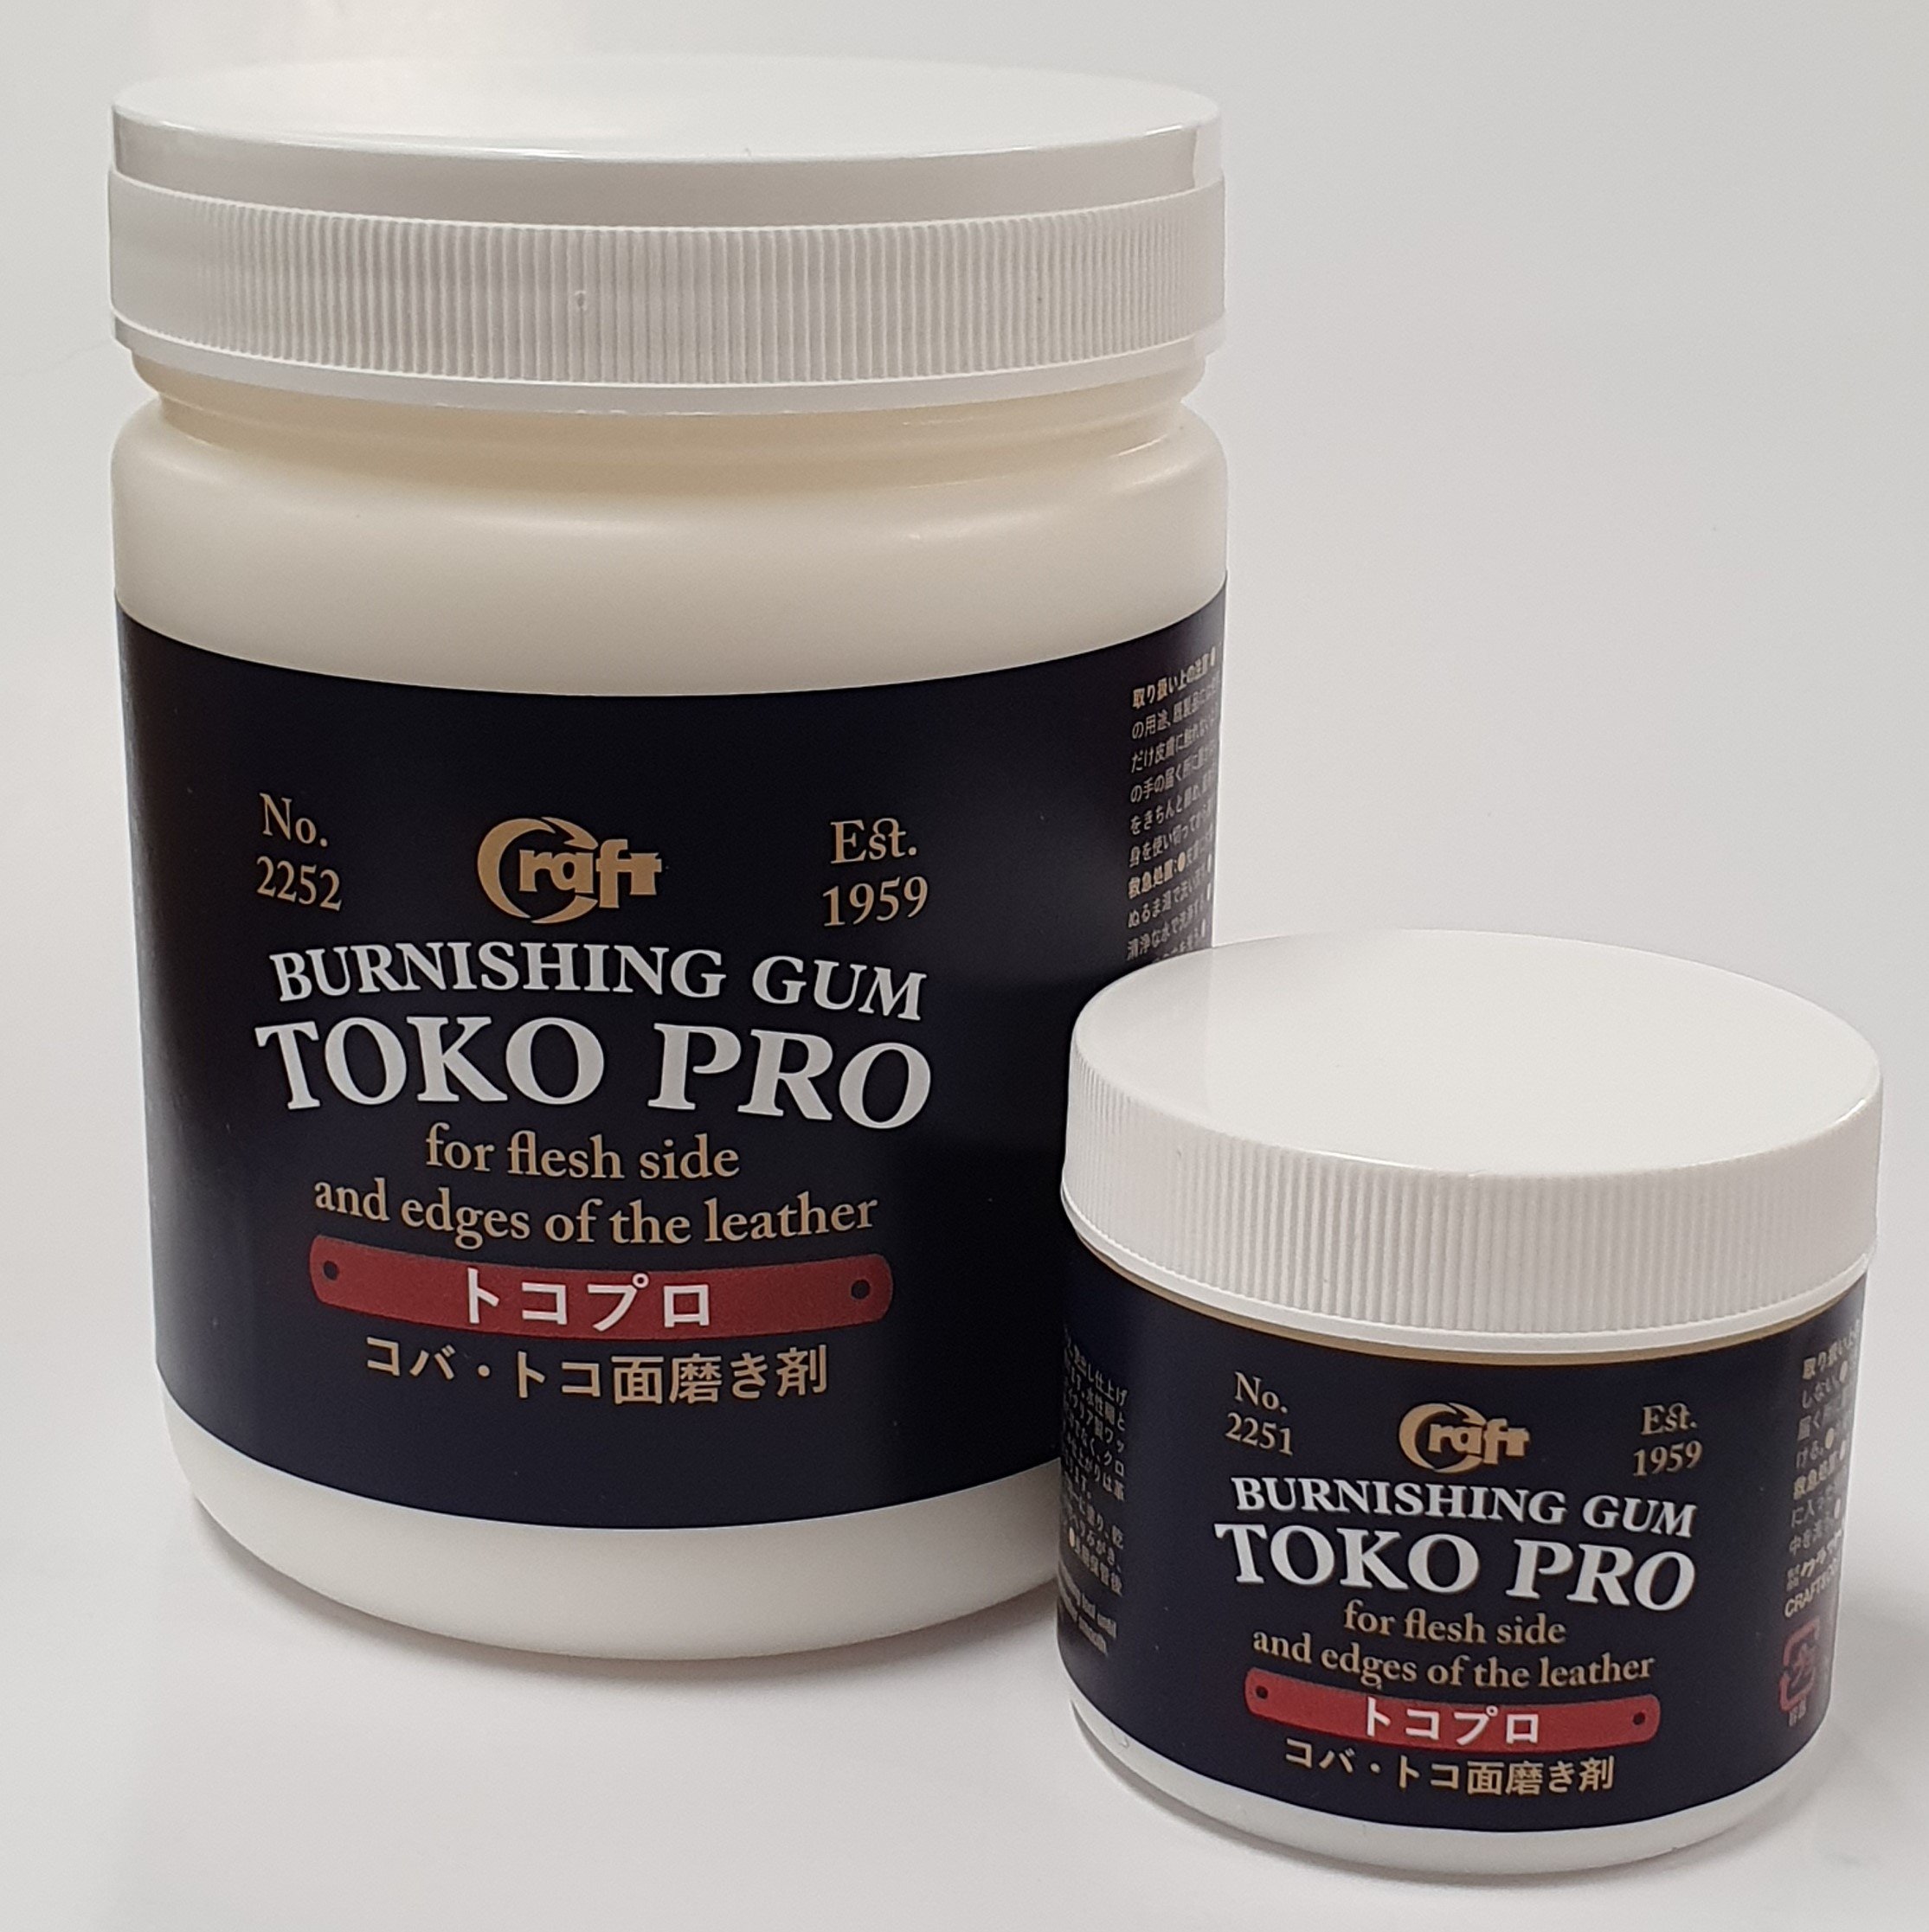 Toko Pro Leather Burnishing Gum 100g (for flesh side and edges of